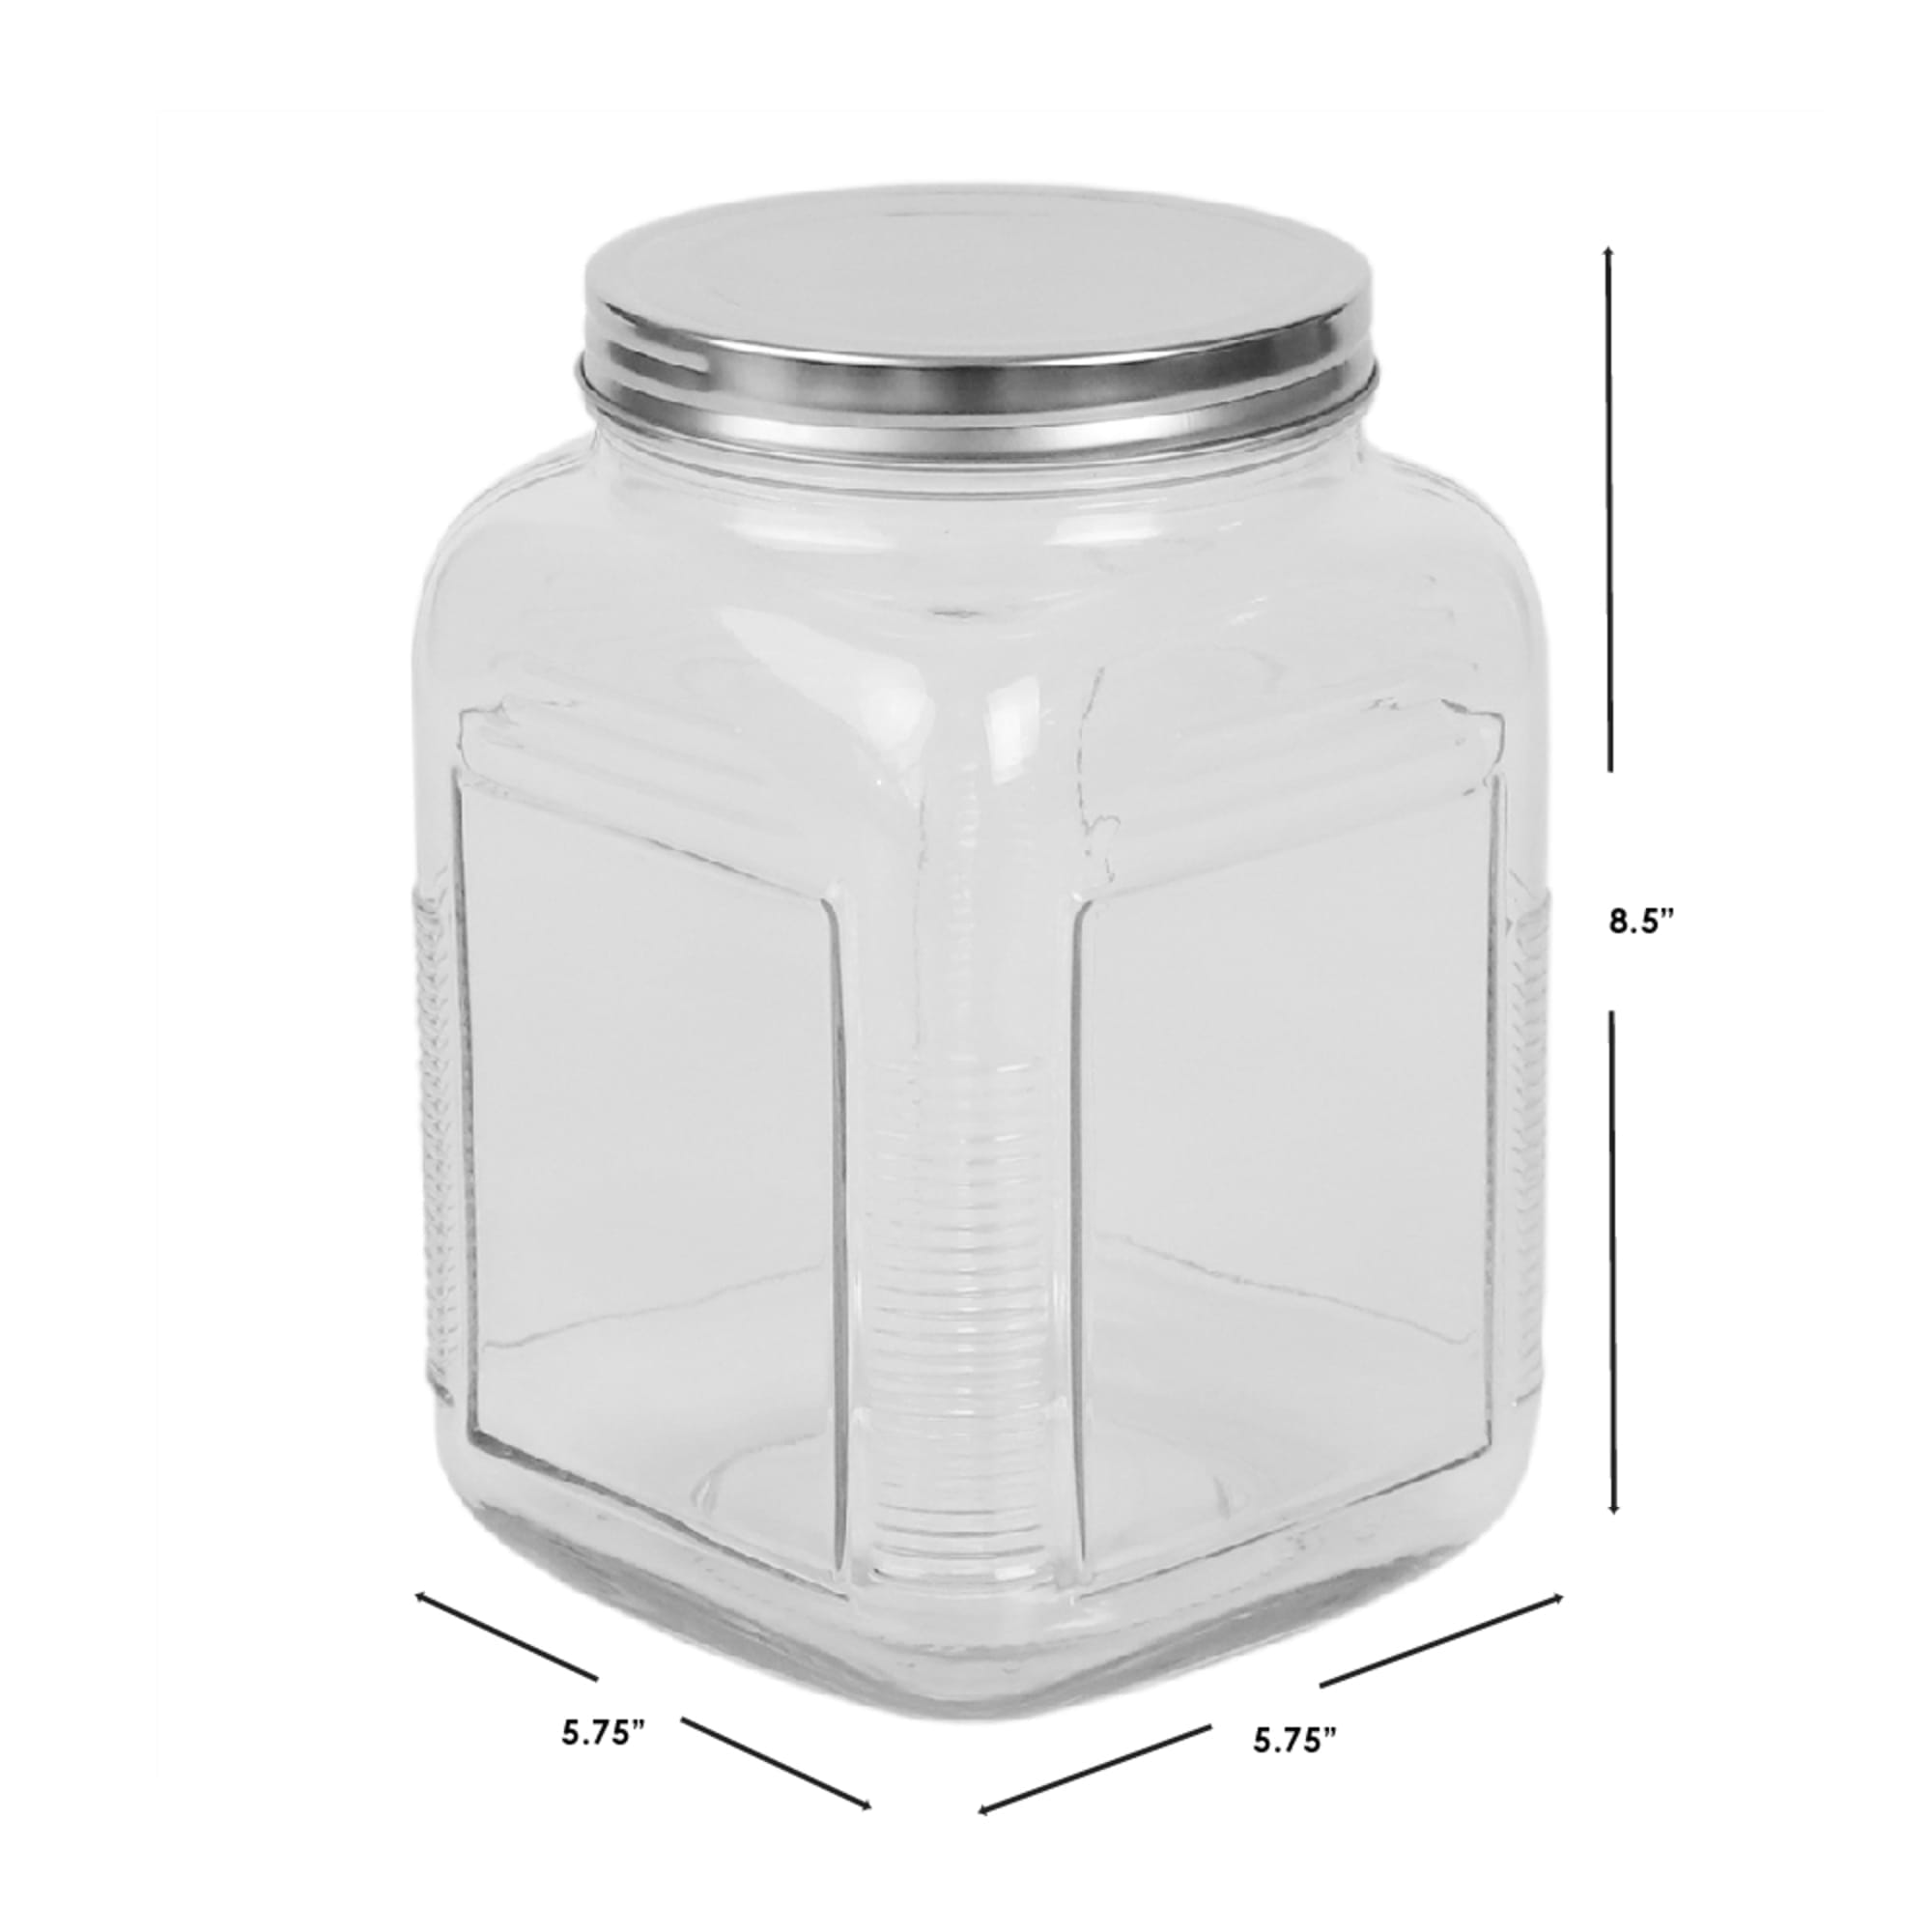 Home Basics Province 2.7 Lt Glass Canister with Metal Lid
 $4.00 EACH, CASE PACK OF 6